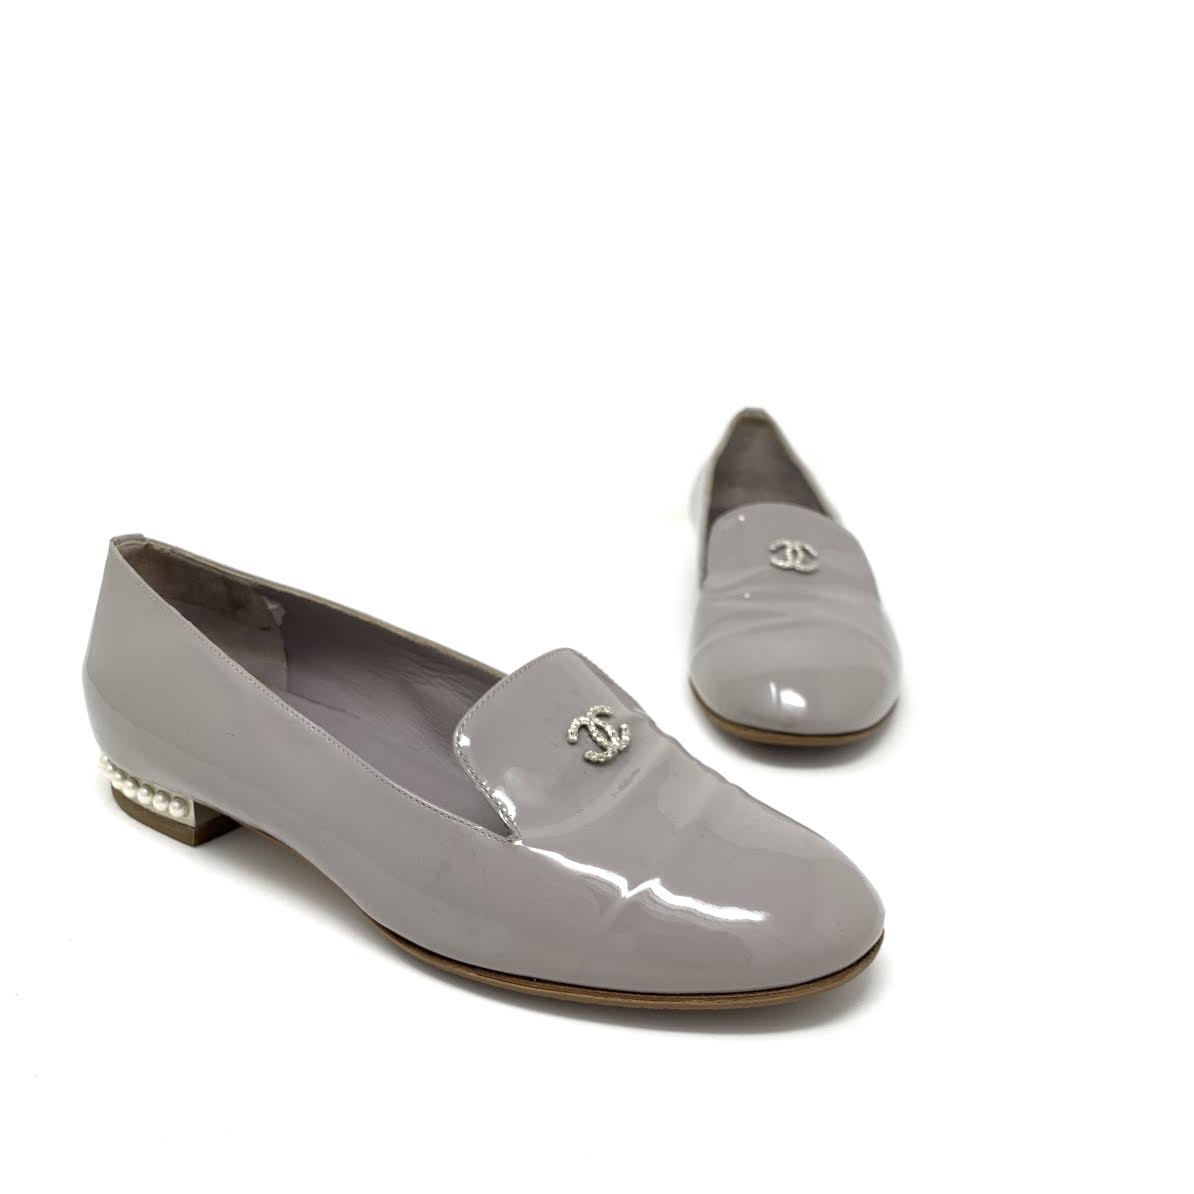 CHANEL Women's Loafer for sale